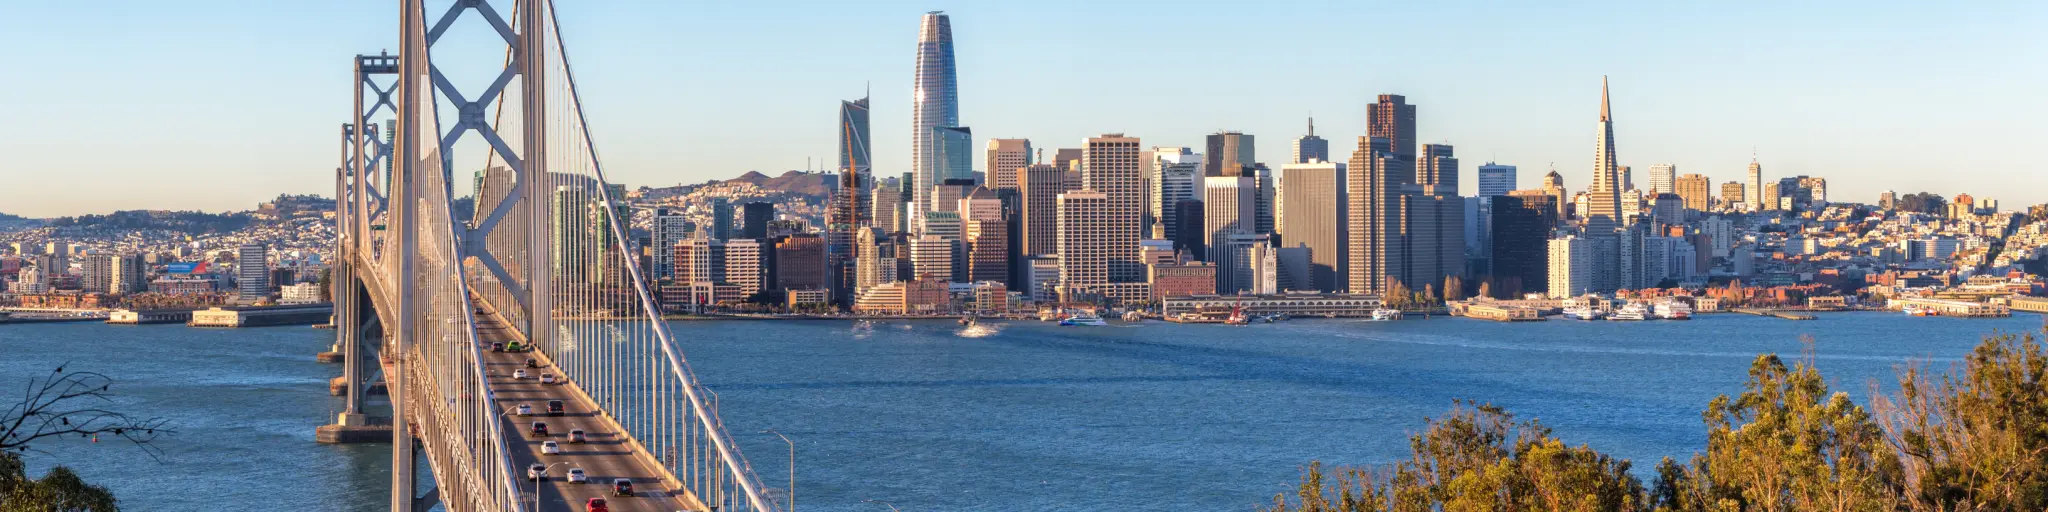 View of San Francisco from across the Bay Bridge